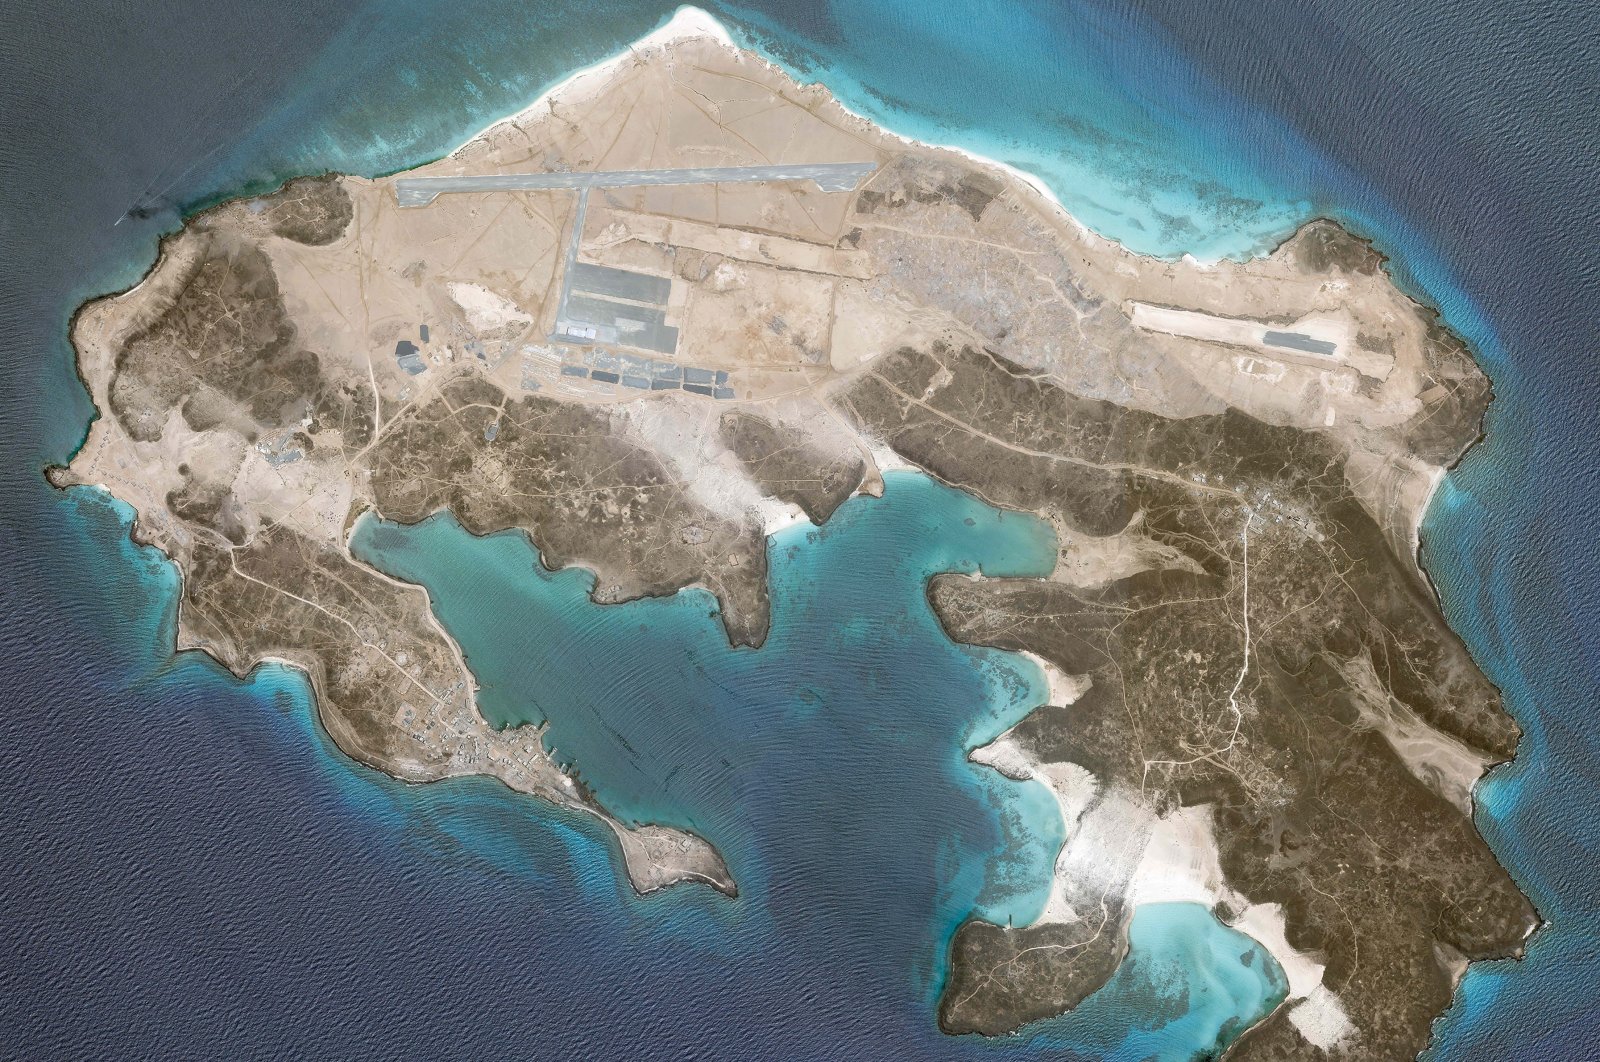 A satellite image released by Planet Labs Inc. shows a mysterious air base being built on Yemen's volcanic Mayun Island, Tuesday, May 25, 2021 (AP Photo)